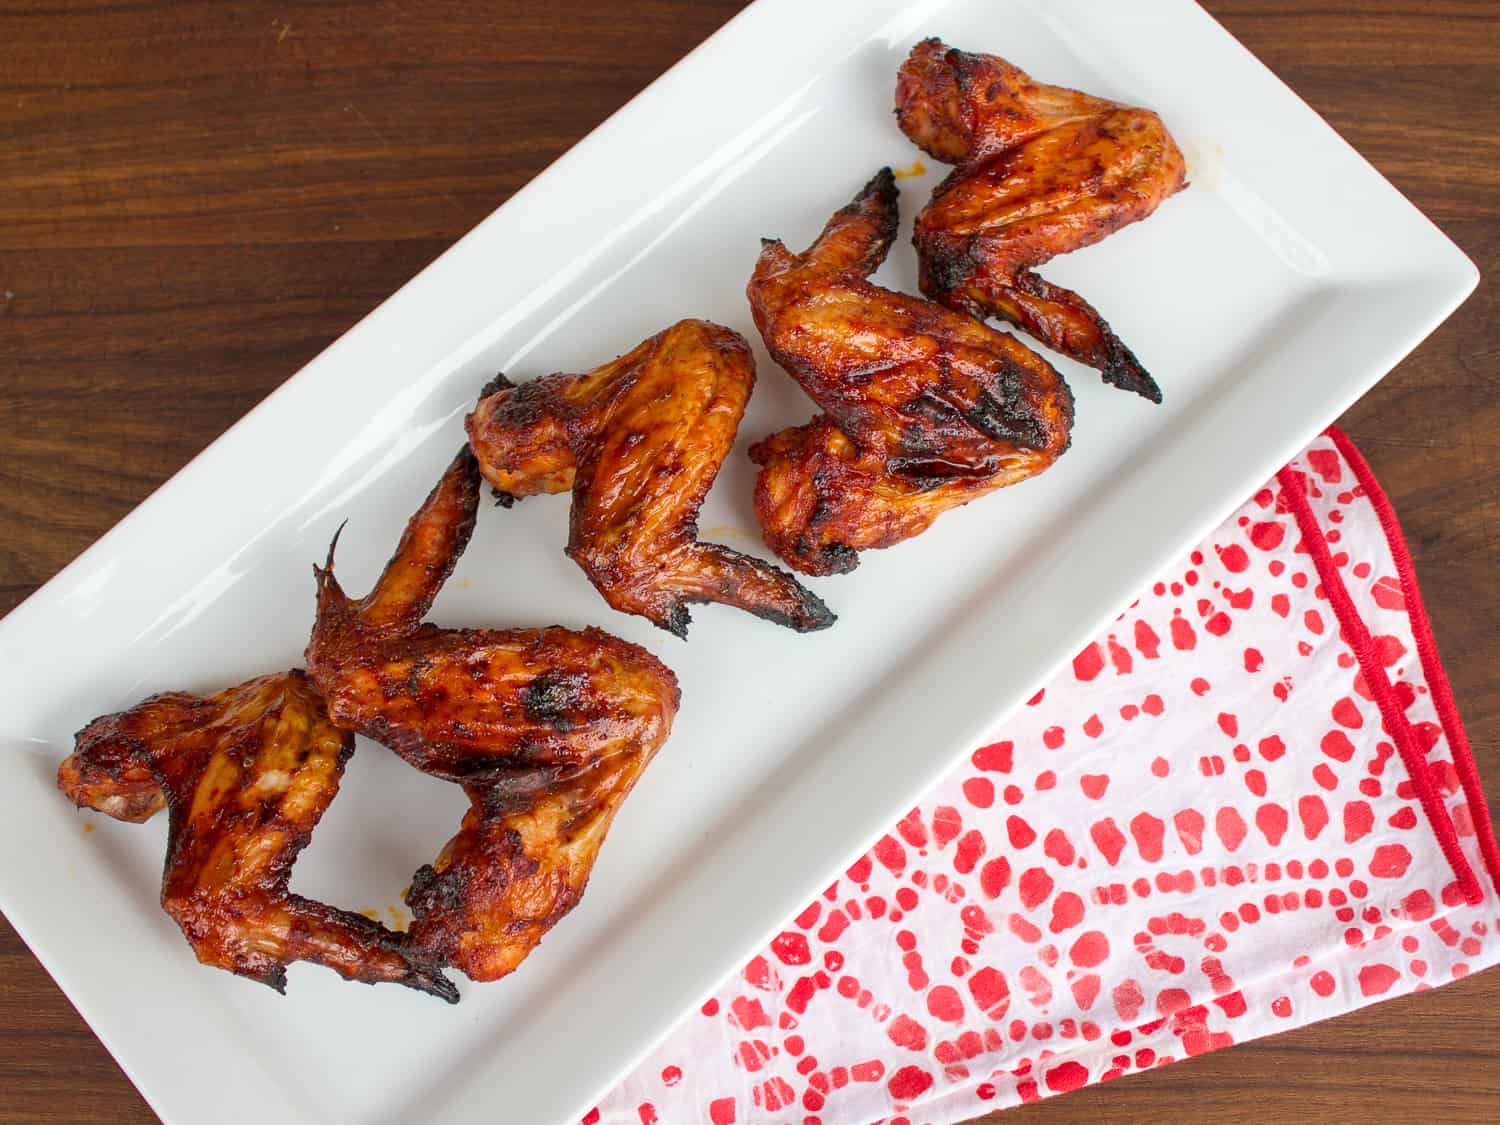 https://www.theblackpeppercorn.com/wp-content/uploads/2018/04/Smoked-Harissa-and-Brown-Sugar-Chicken-Wings-Overhead-hires.jpg